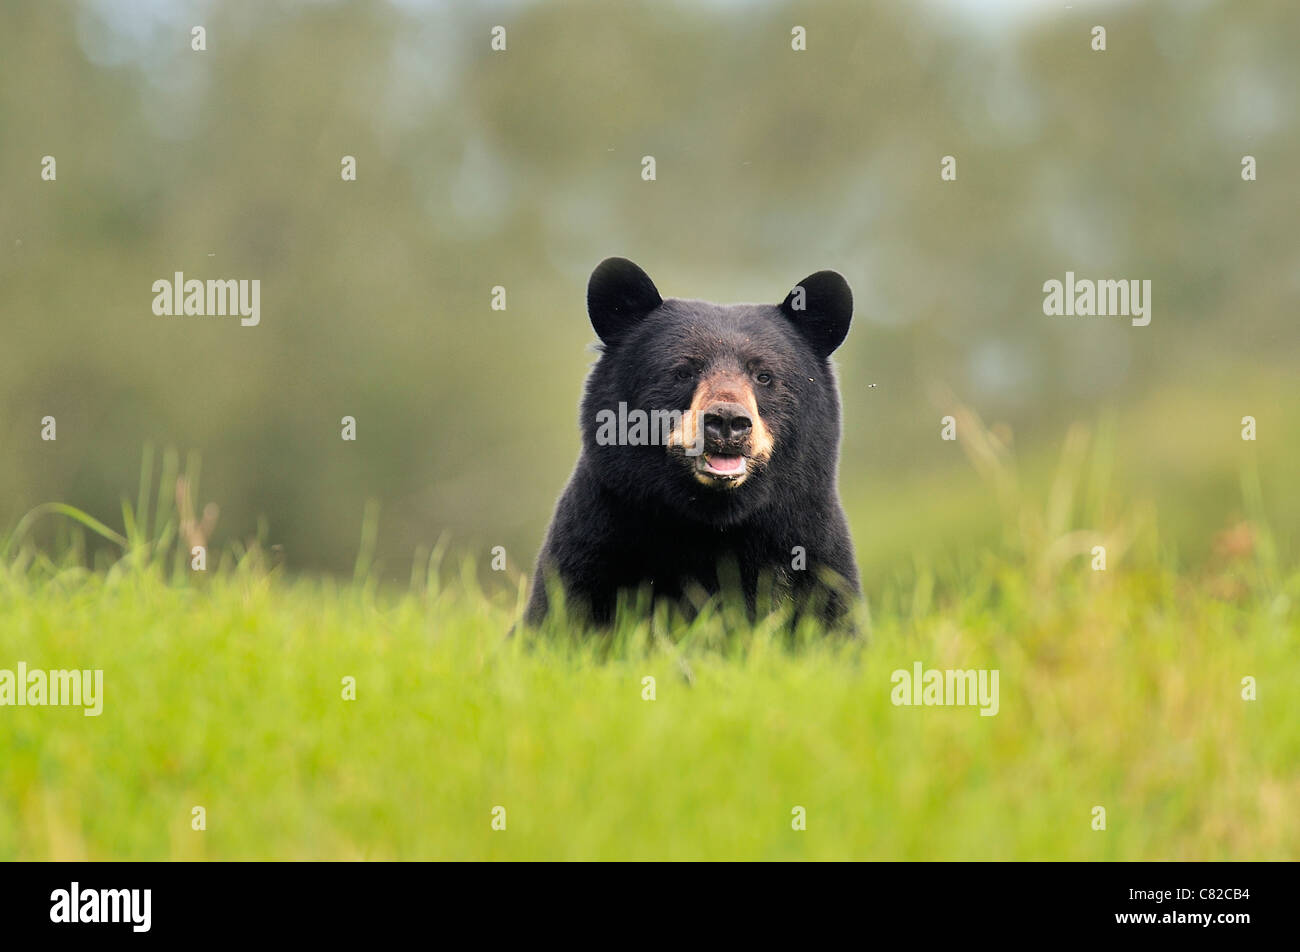 A wild adult black bear looking frontward over the tall grass Stock Photo